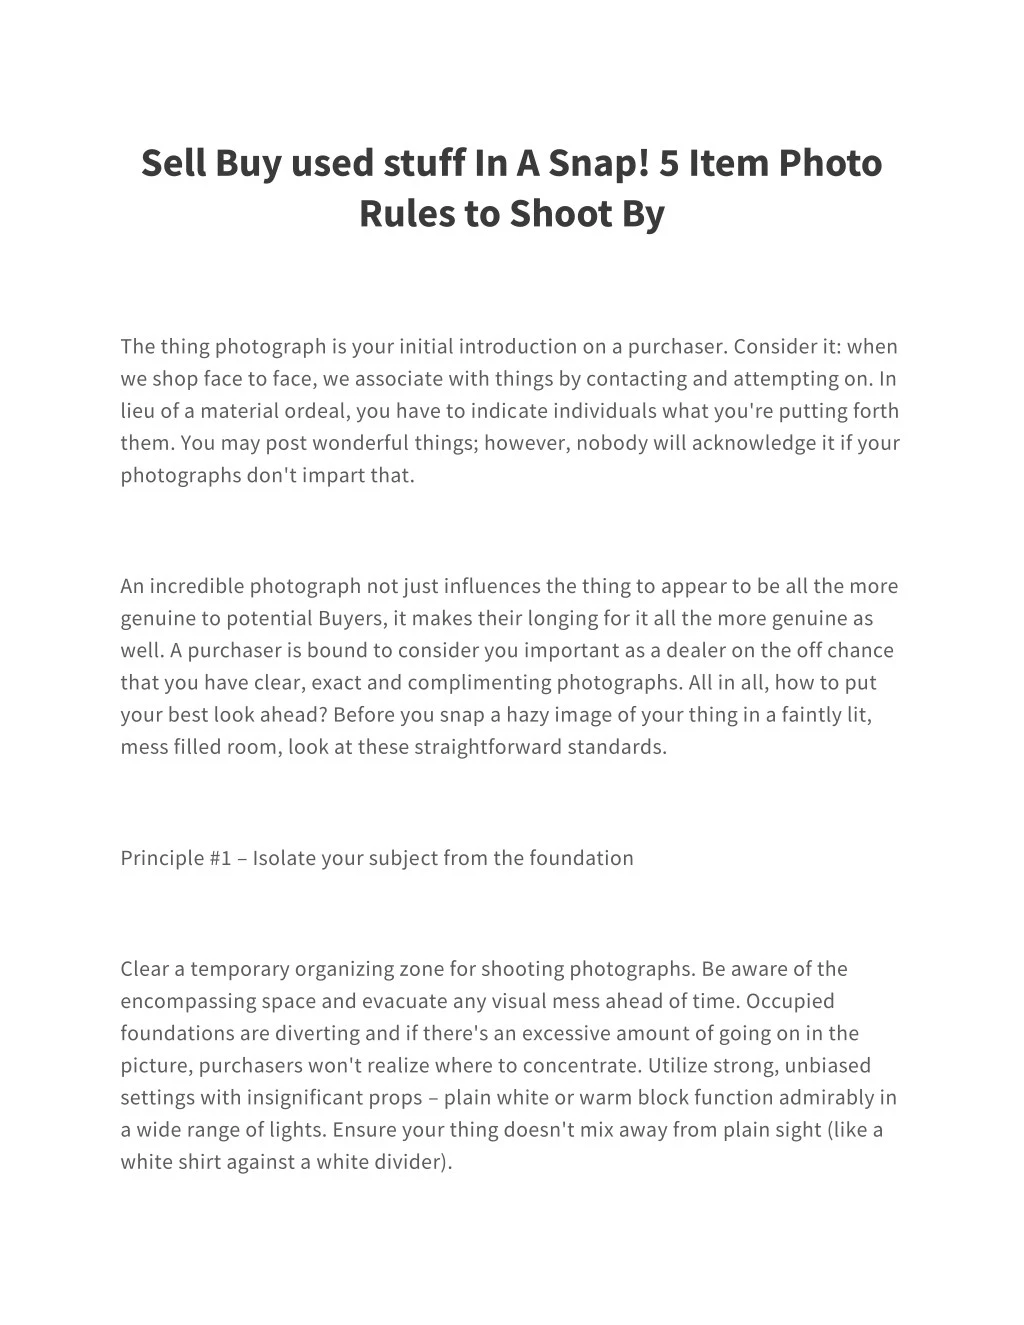 sell buy used stuff in a snap 5 item photo rules